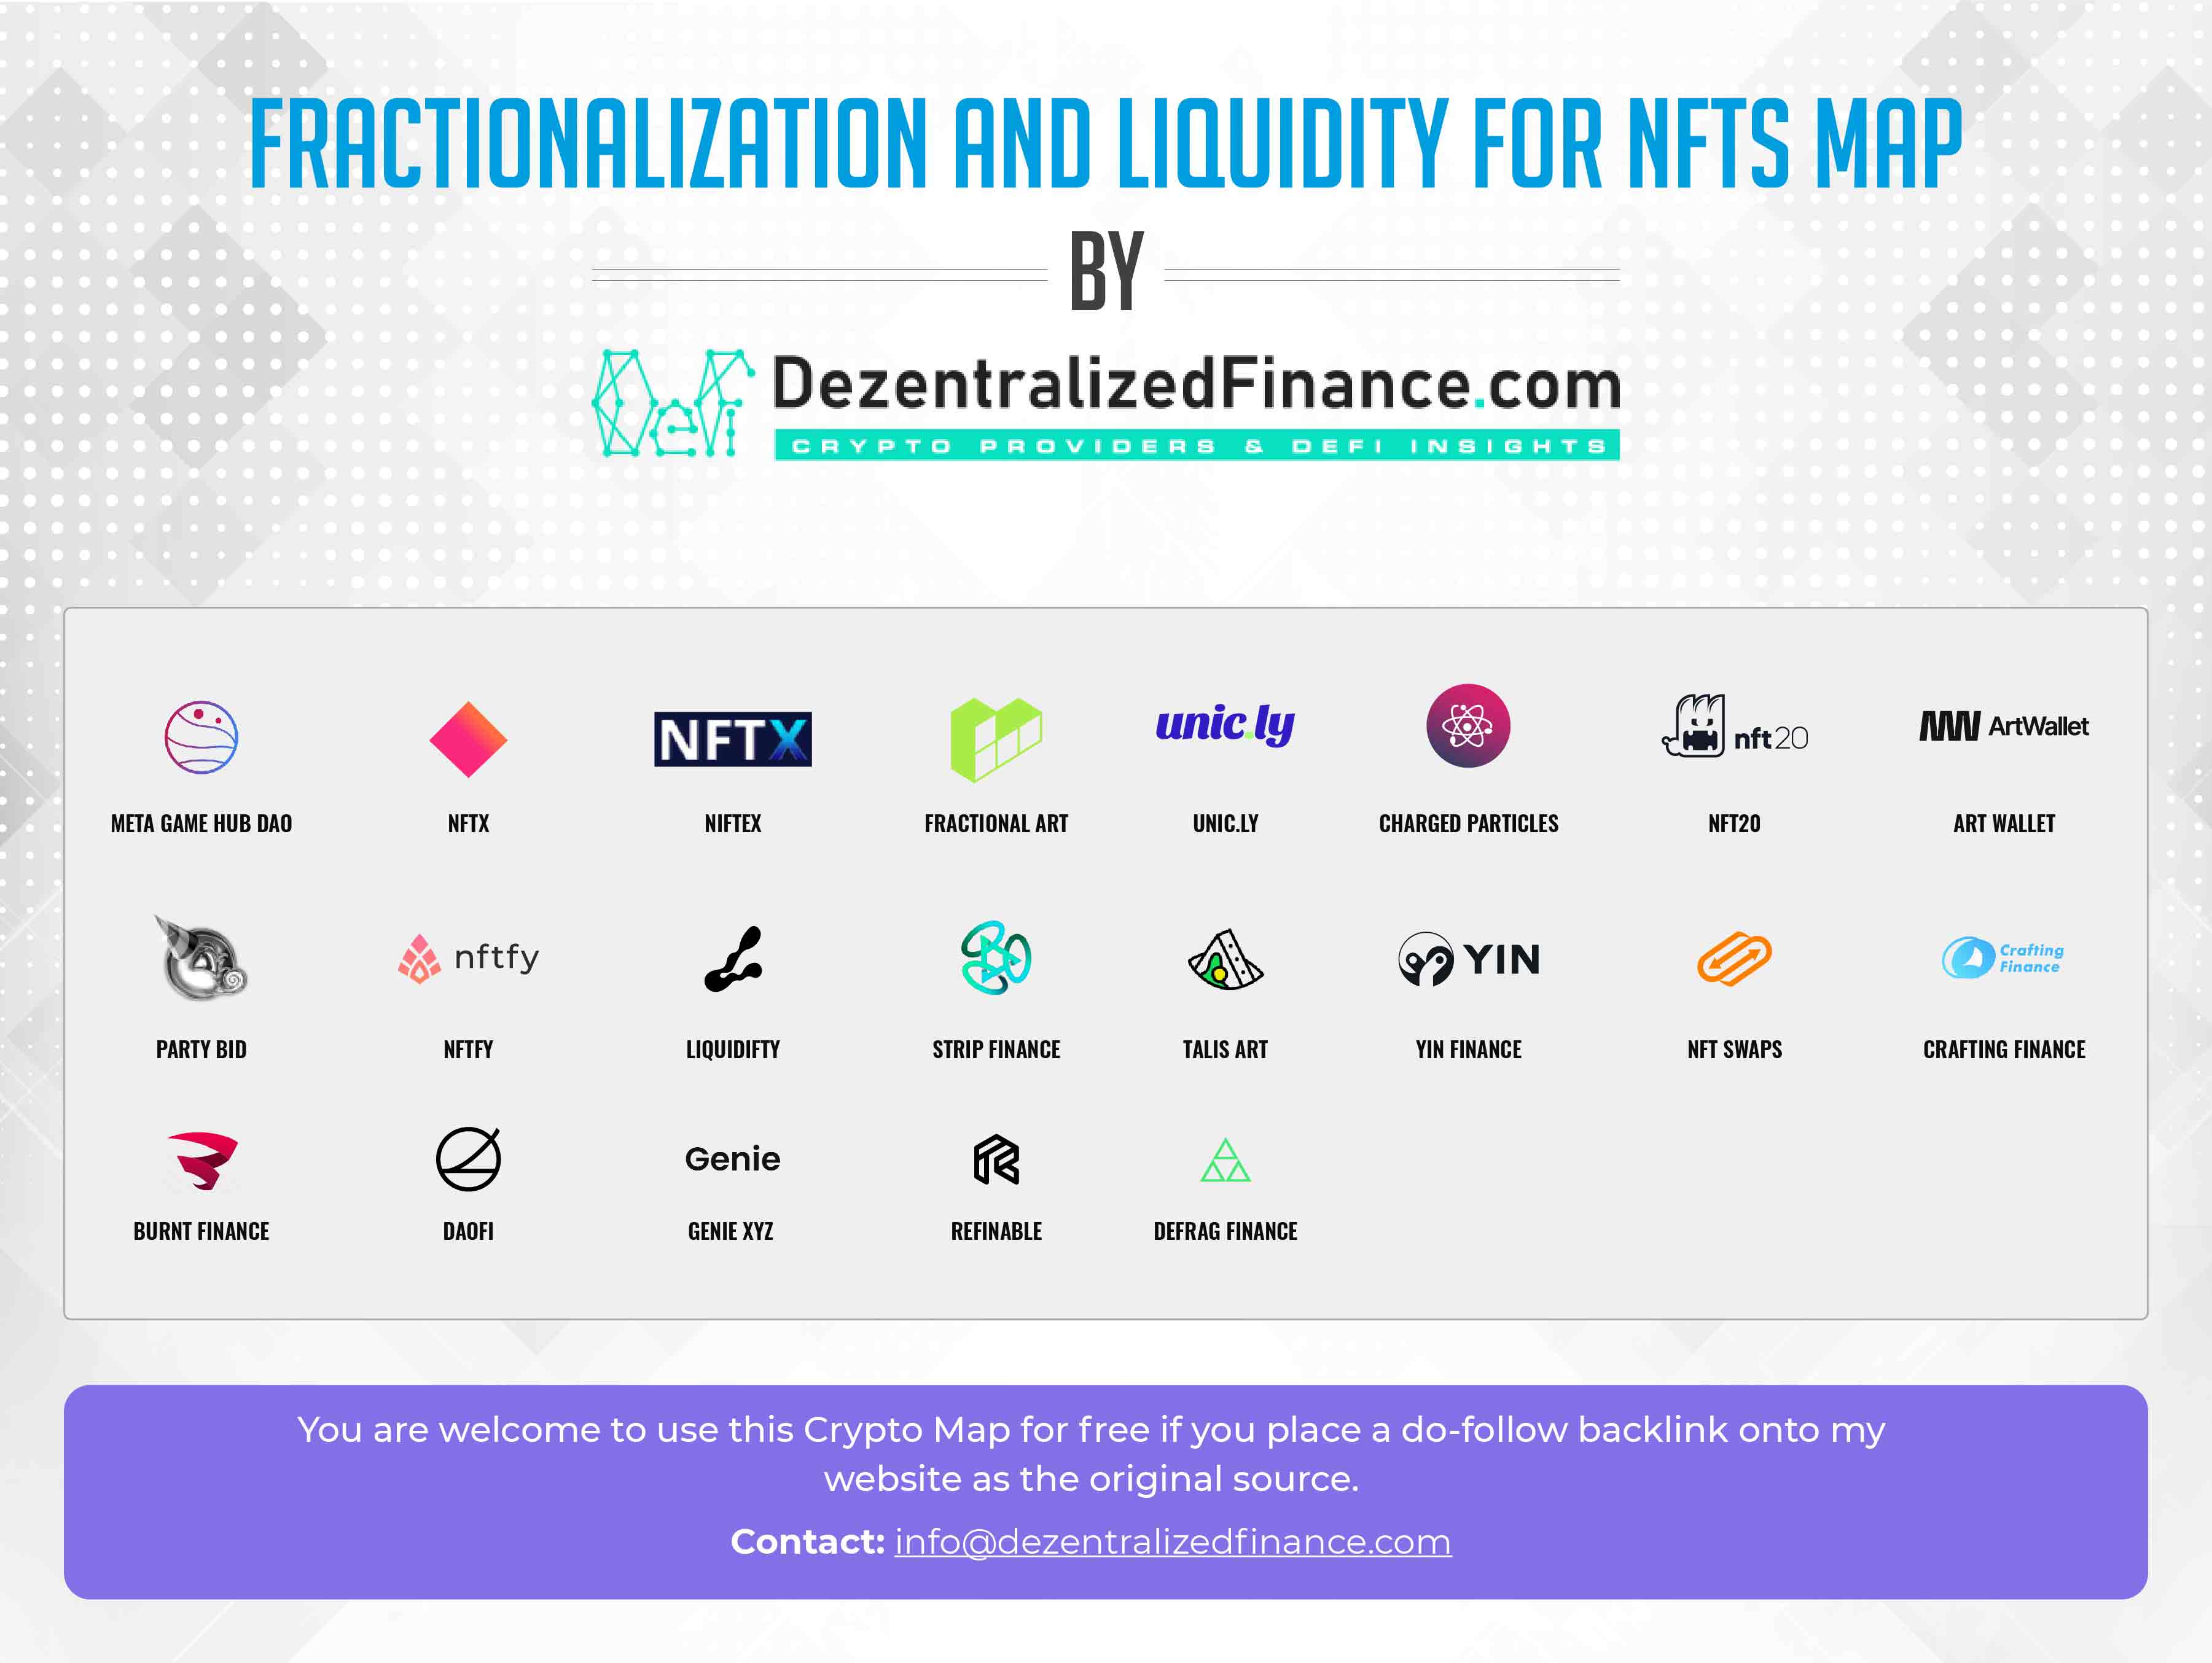 Fractionalization and Liquidity for NFTs 2021-1-01